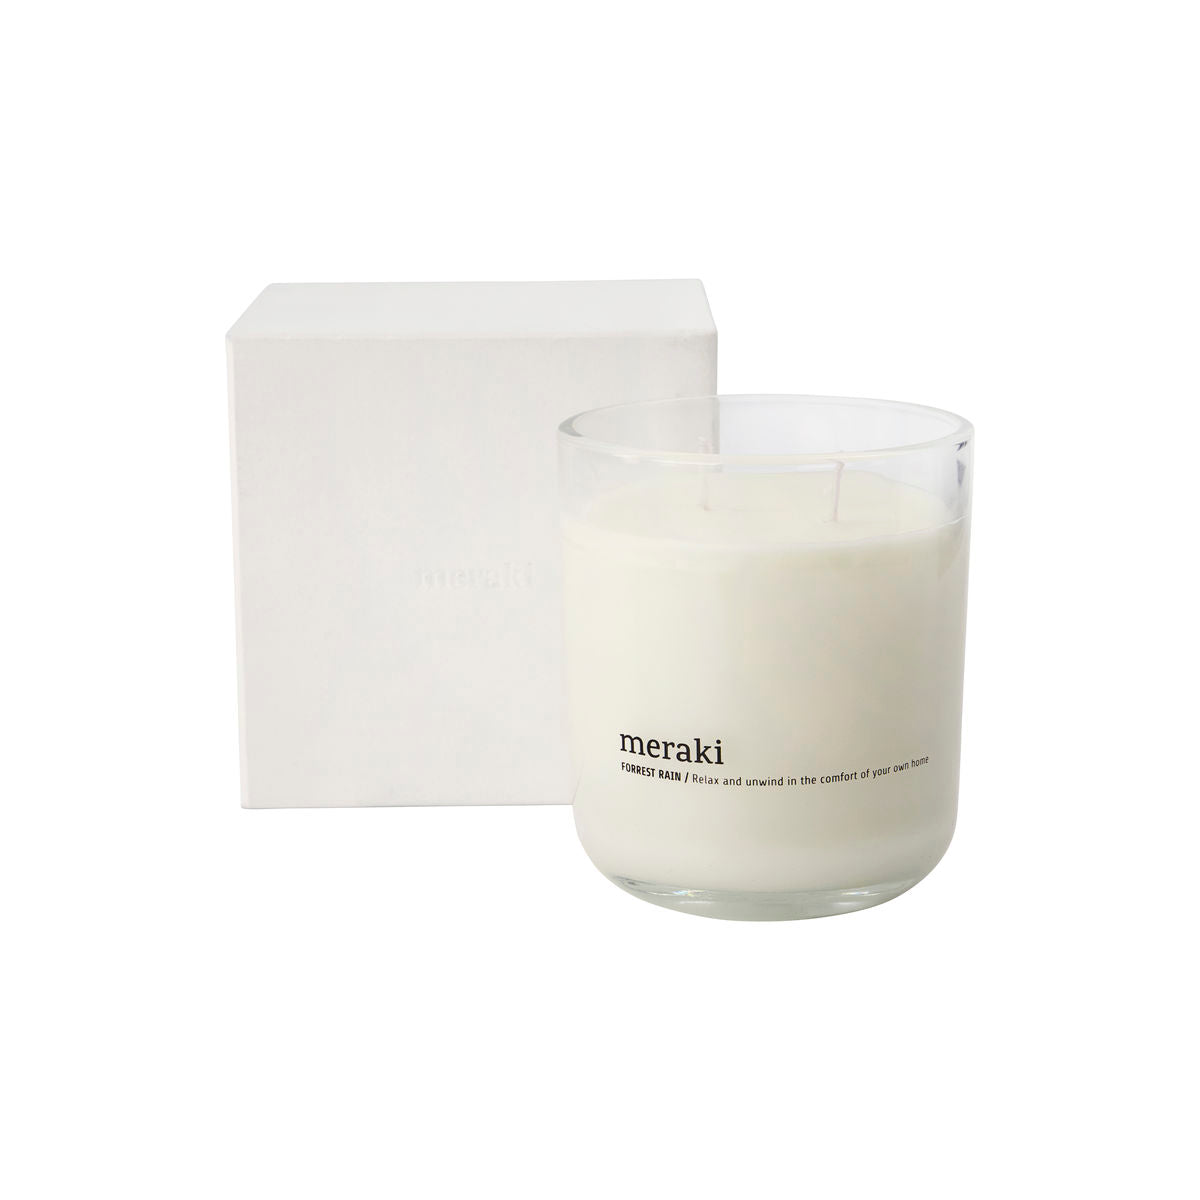 MERAKI SCENTED CANDLE FOREST RAIN with box